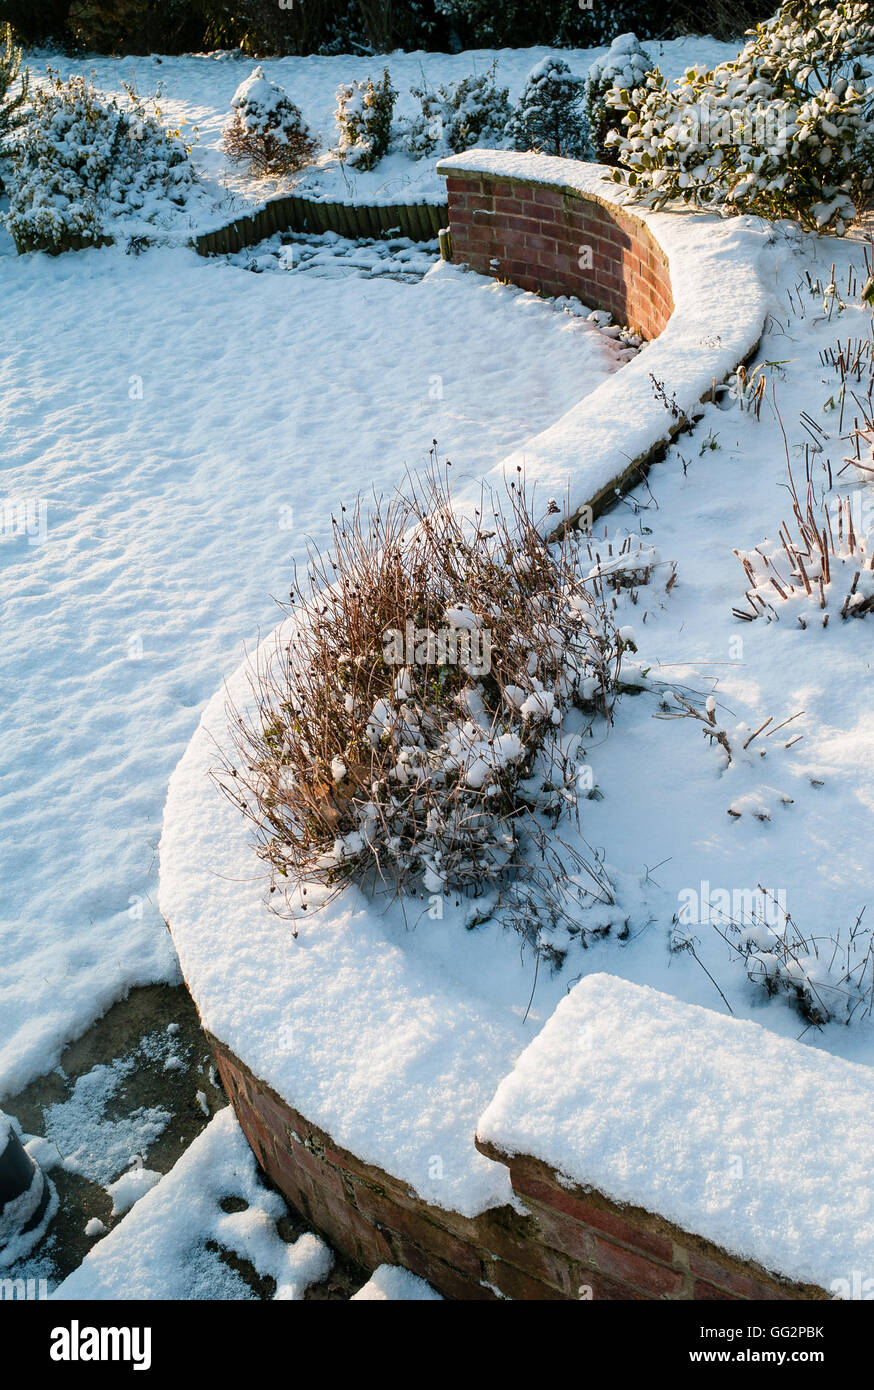 A sinuous retaining snow-covered wall in winter in an English garden Stock Photo